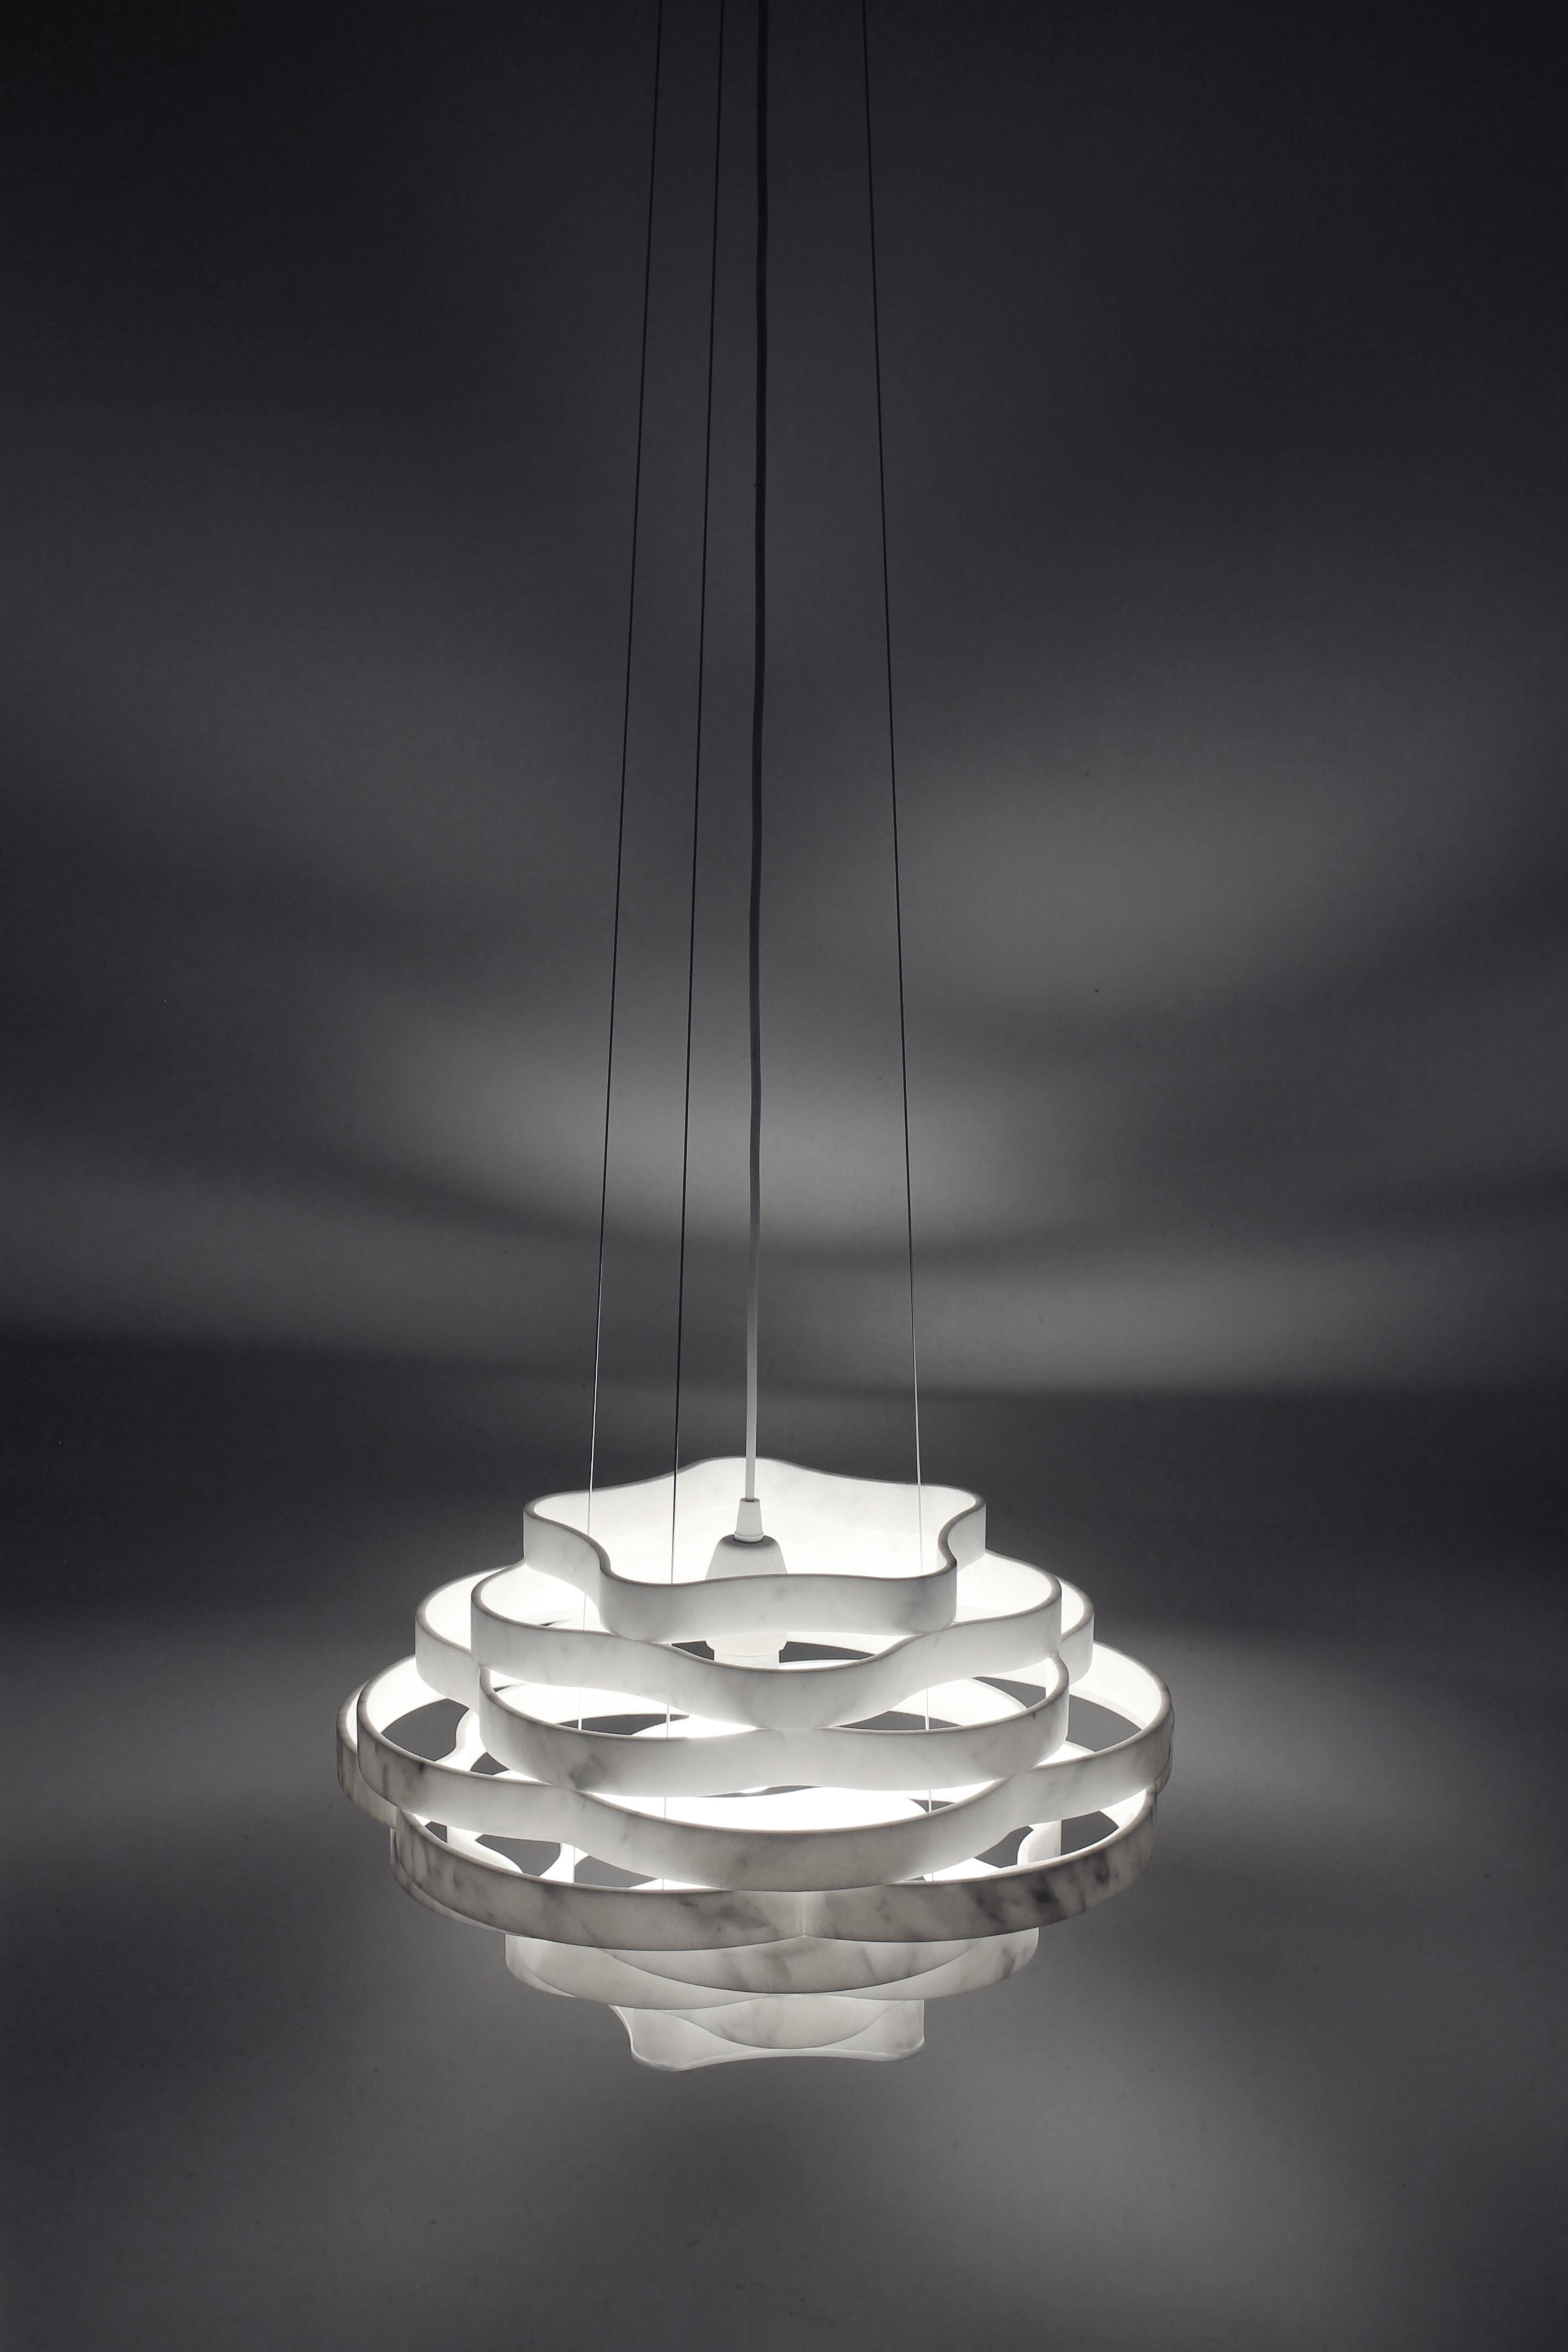 Suspension light made of White Carrara marble designed by Paolo Ulian in 2023. The light is called NEST, due to the shape of the lampshade.

The peculiarity of this lamp is that all the rings necessary for the construction are obtained from a single